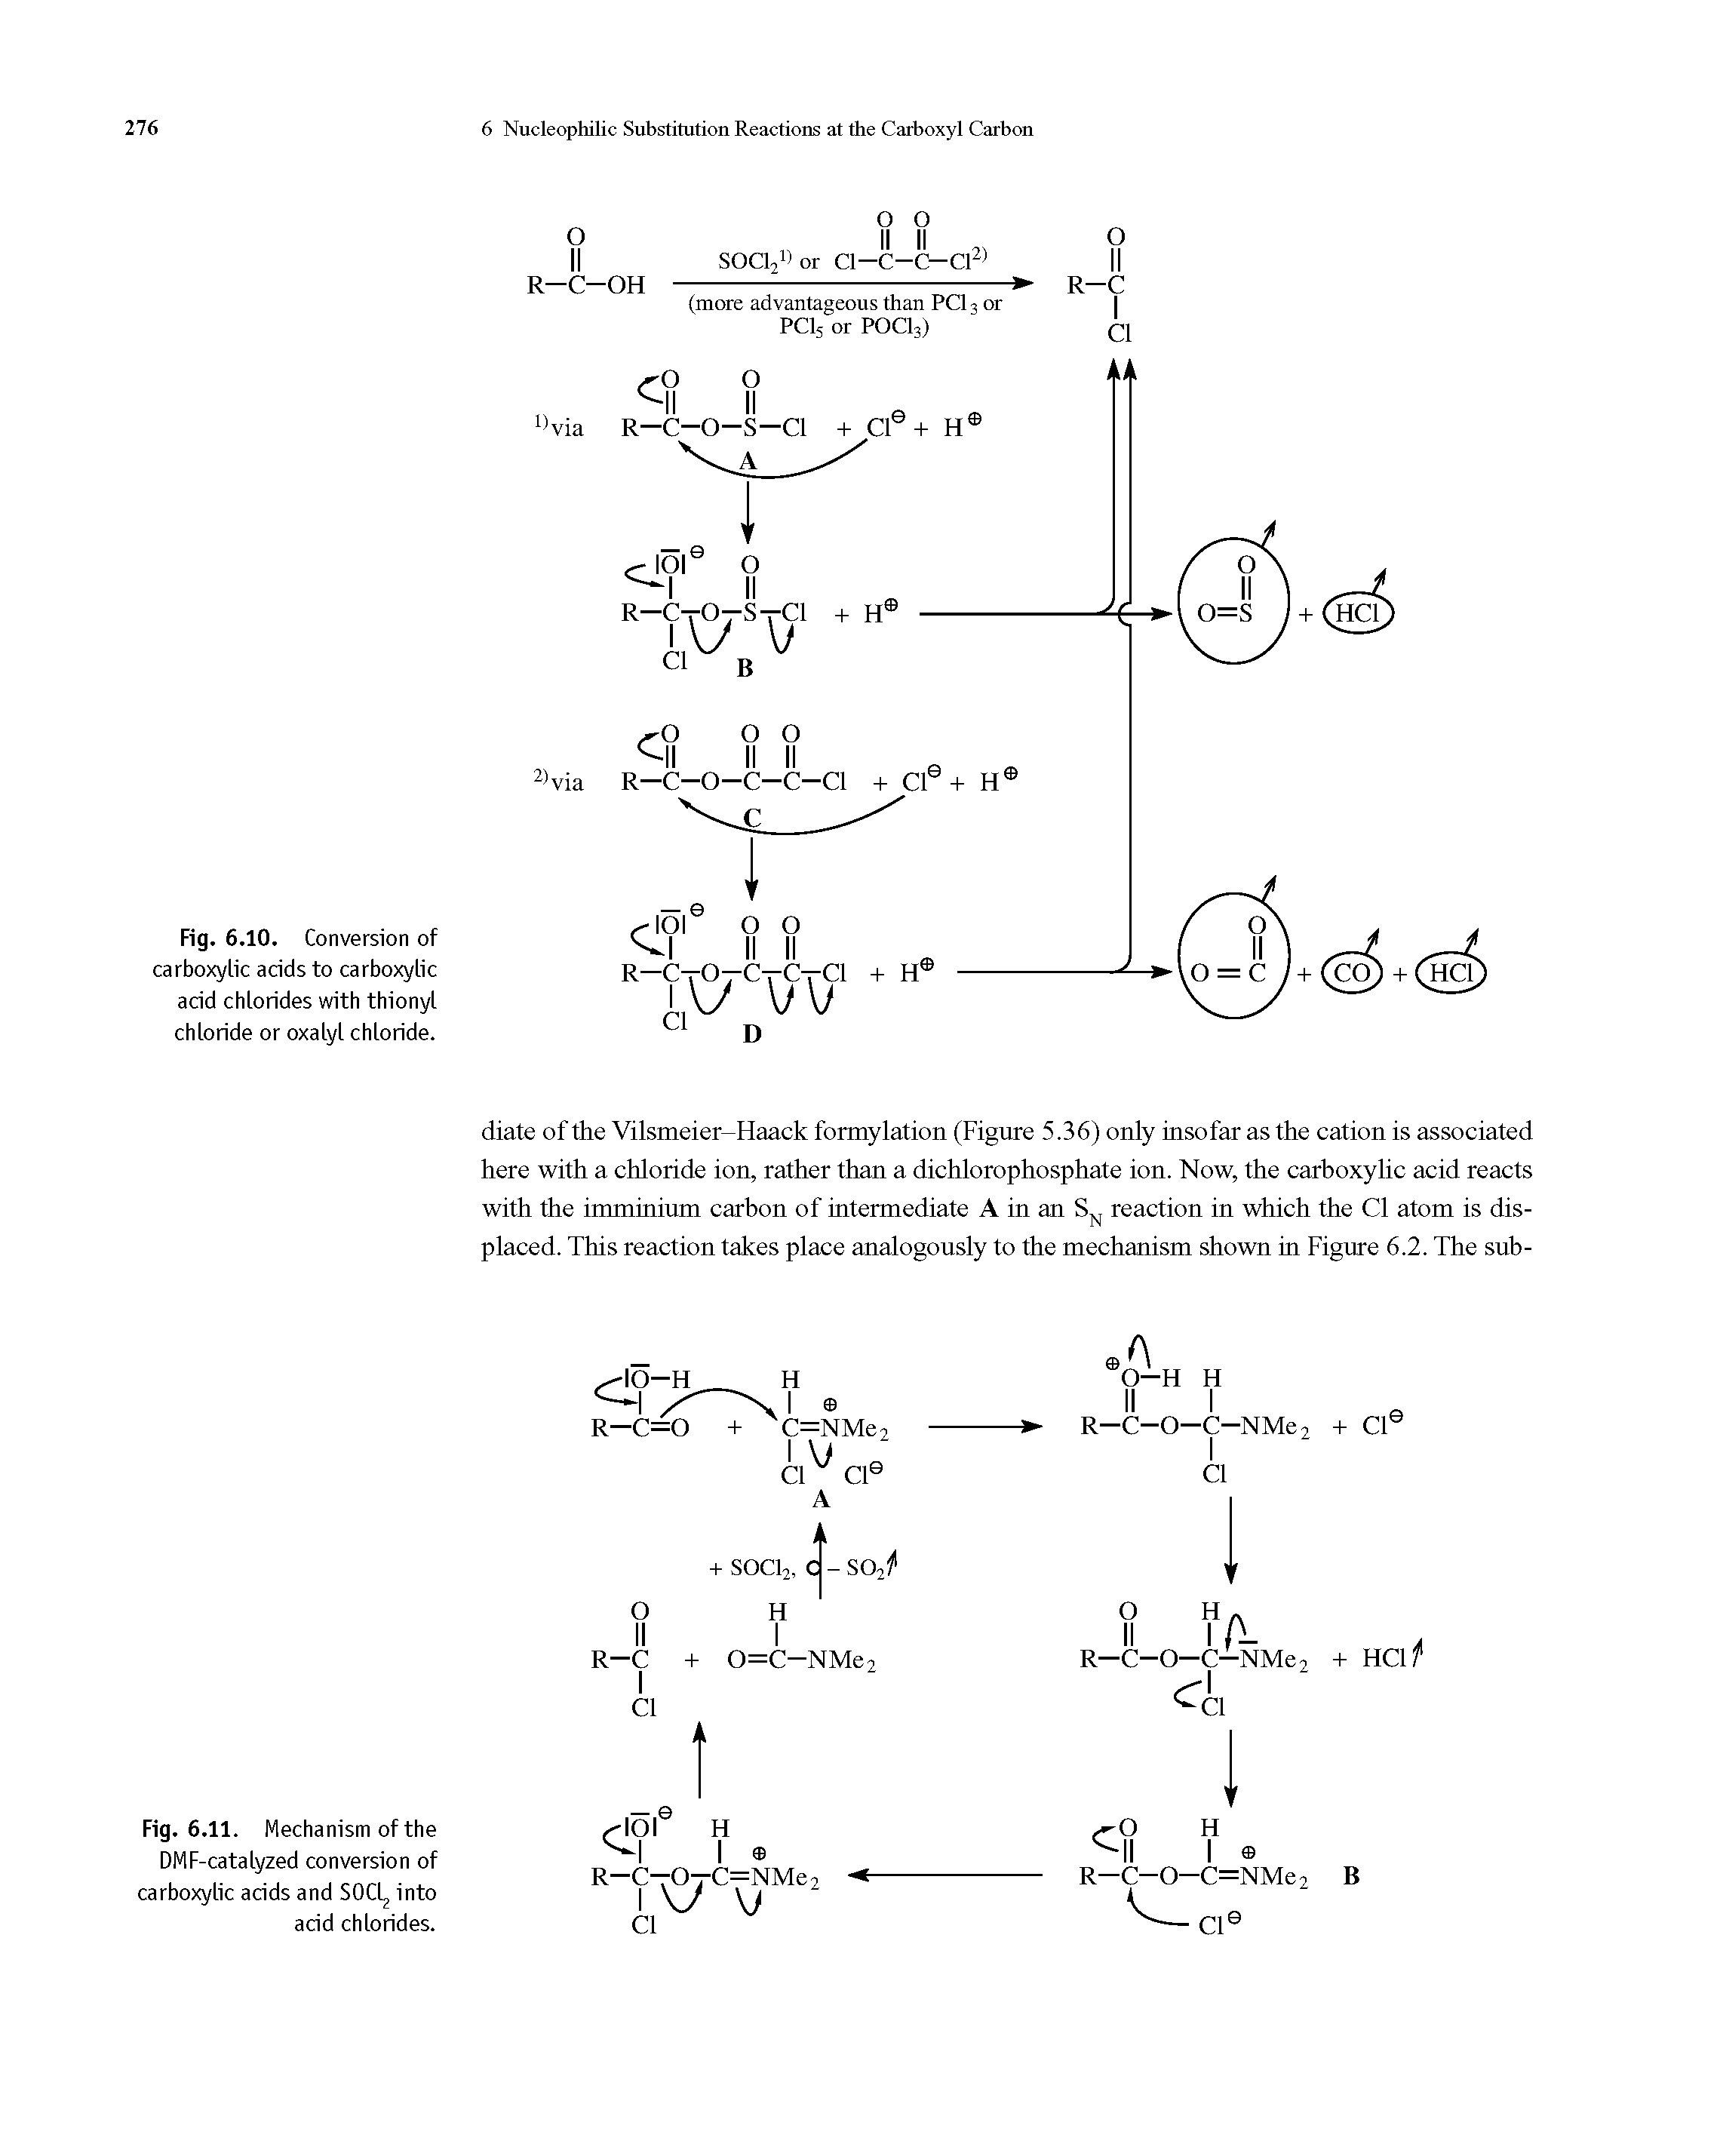 Fig. 6.11. Mechanism of the DMF-catalyzed conversion of carboxylic acids and SOC into acid chlorides.